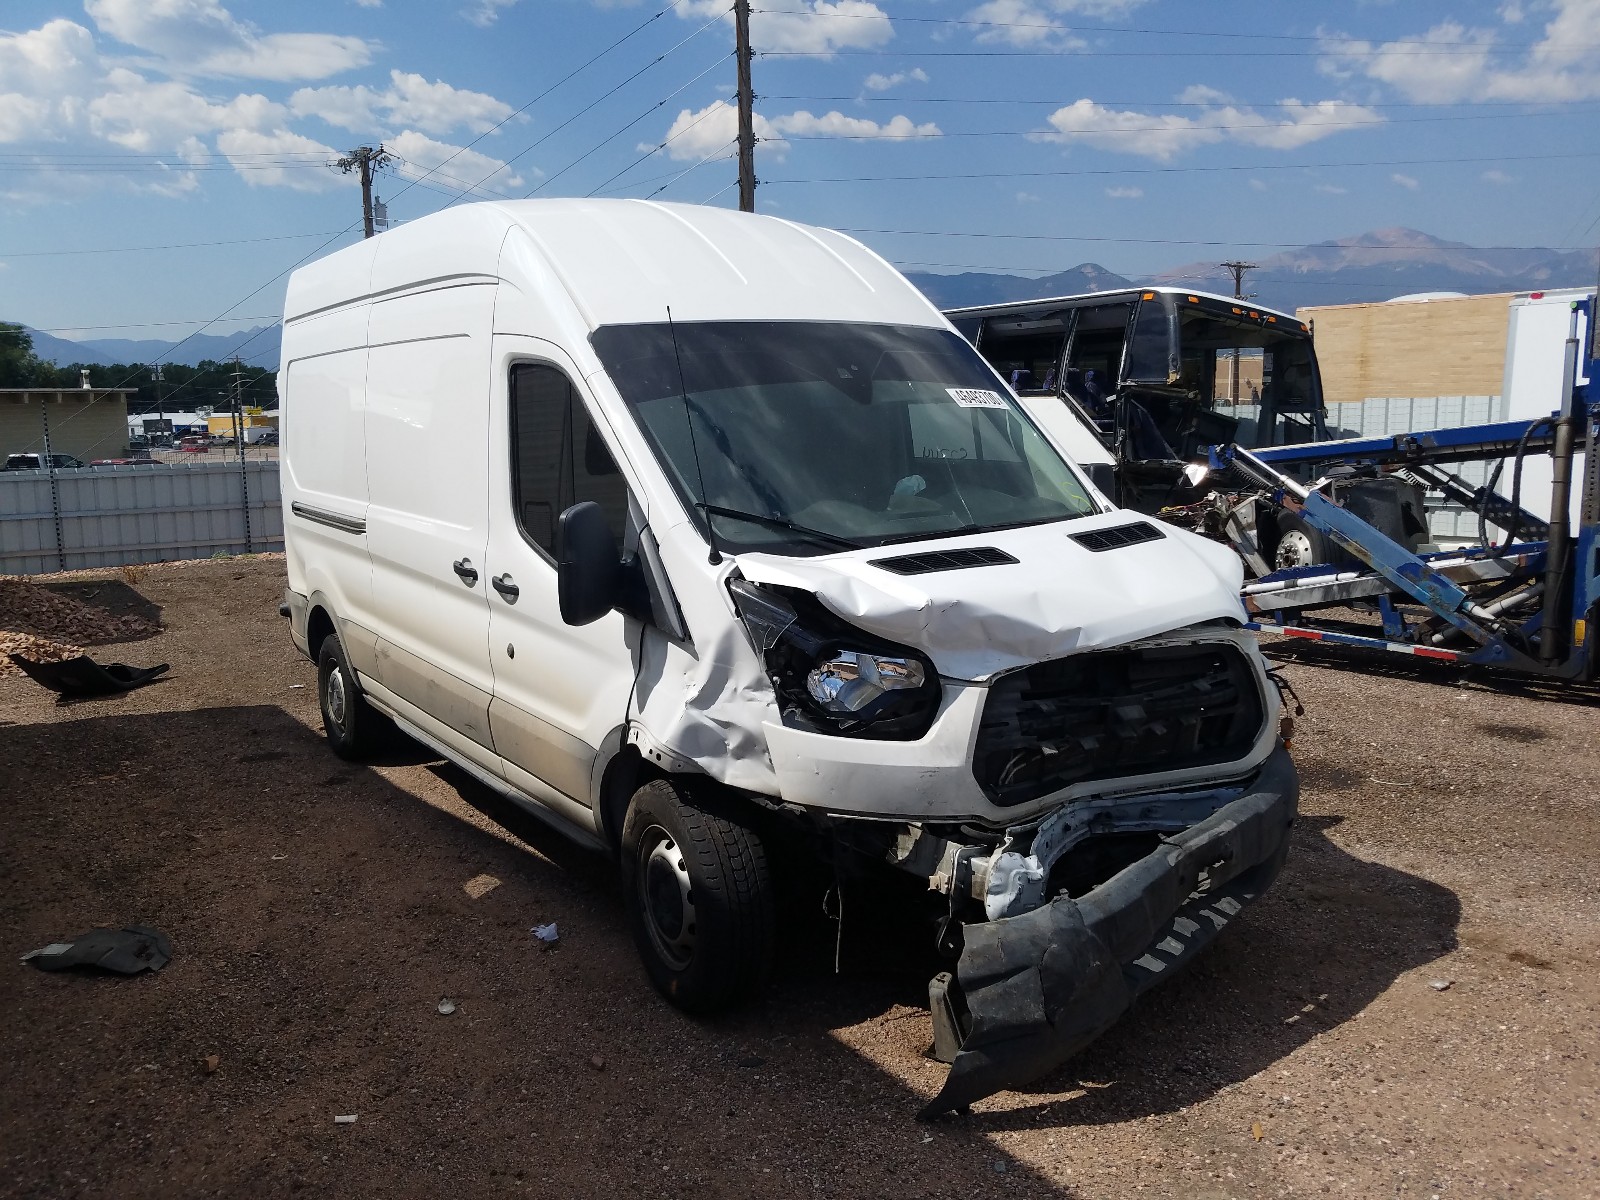 salvage ford transit van for sale